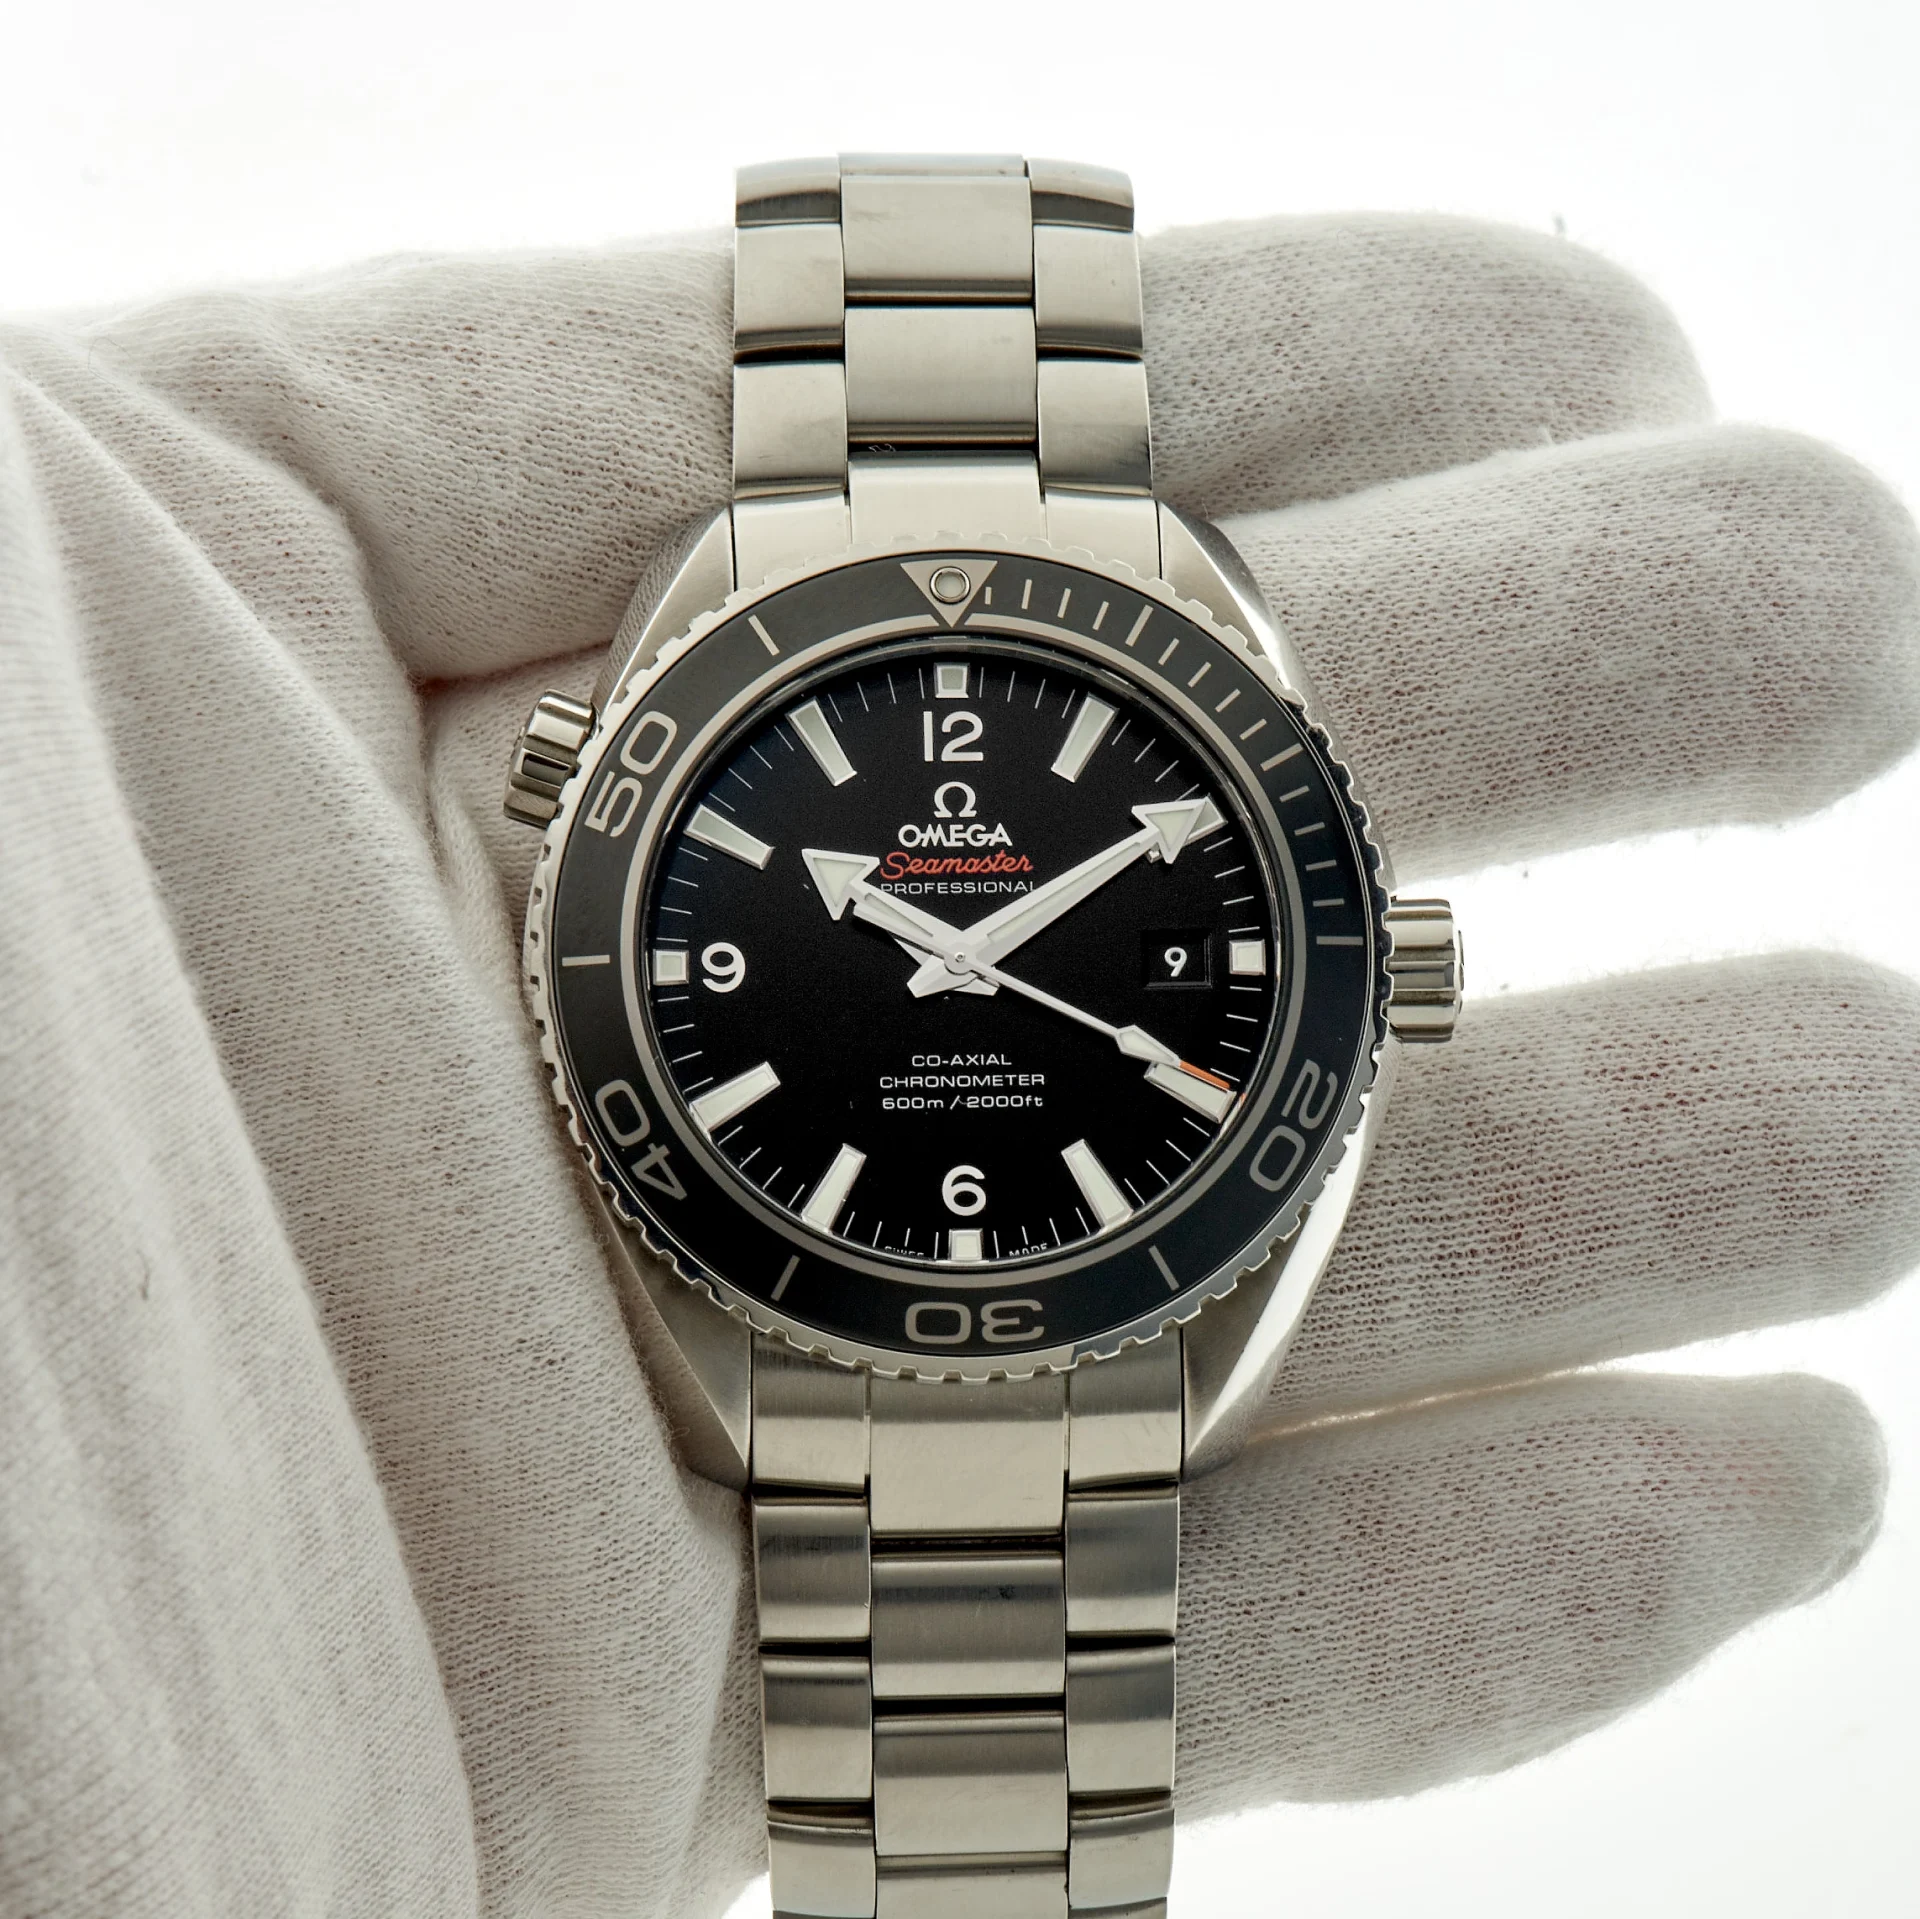 Omega Seamaster Planet Ocean 600M Co-Axial 45.5 Stainless Steel / Black / Bracelet 232.30.46.21.01.001 Listing Image